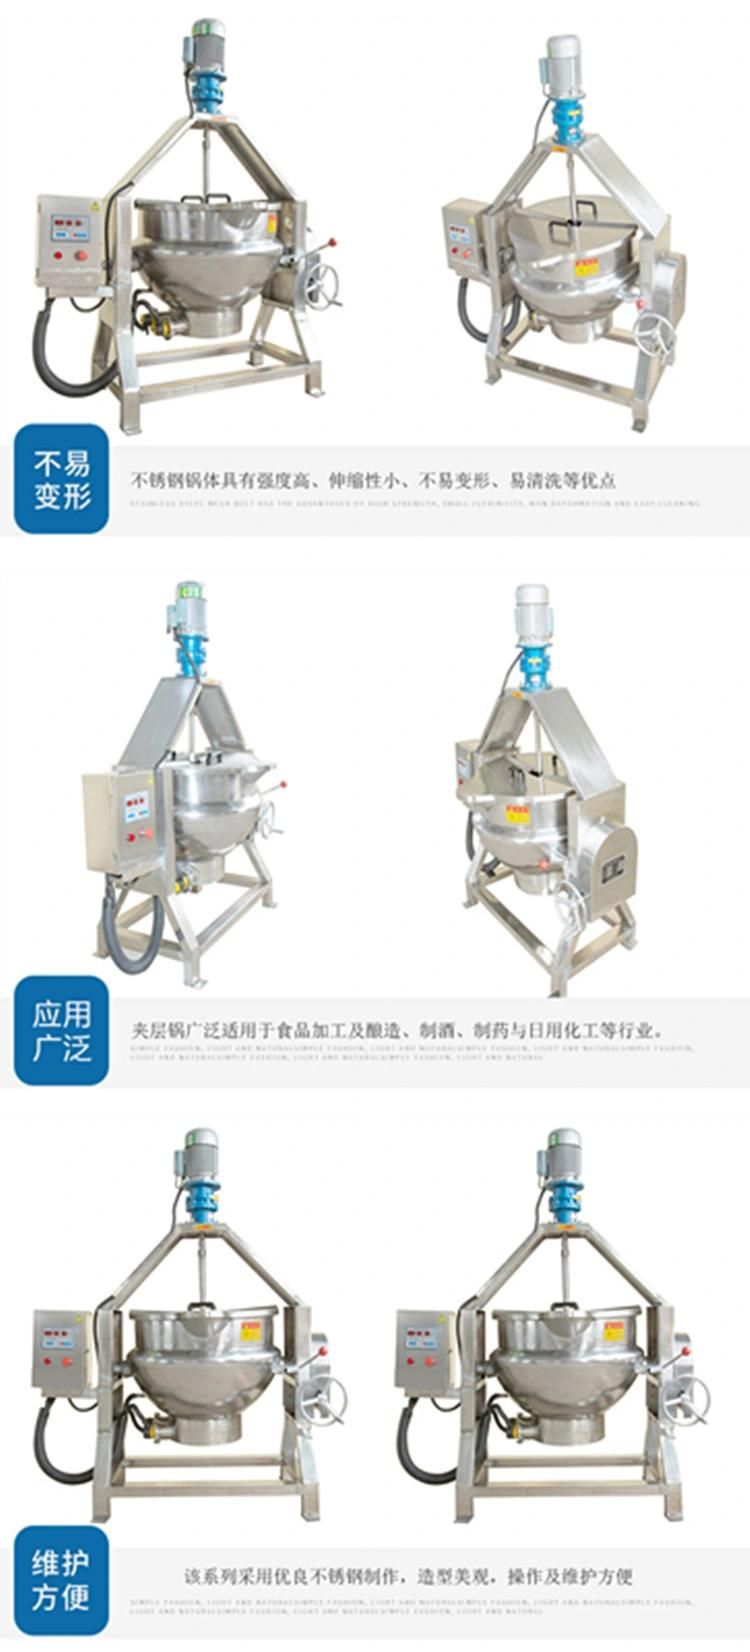 Automatic Steam Cooking Equipment